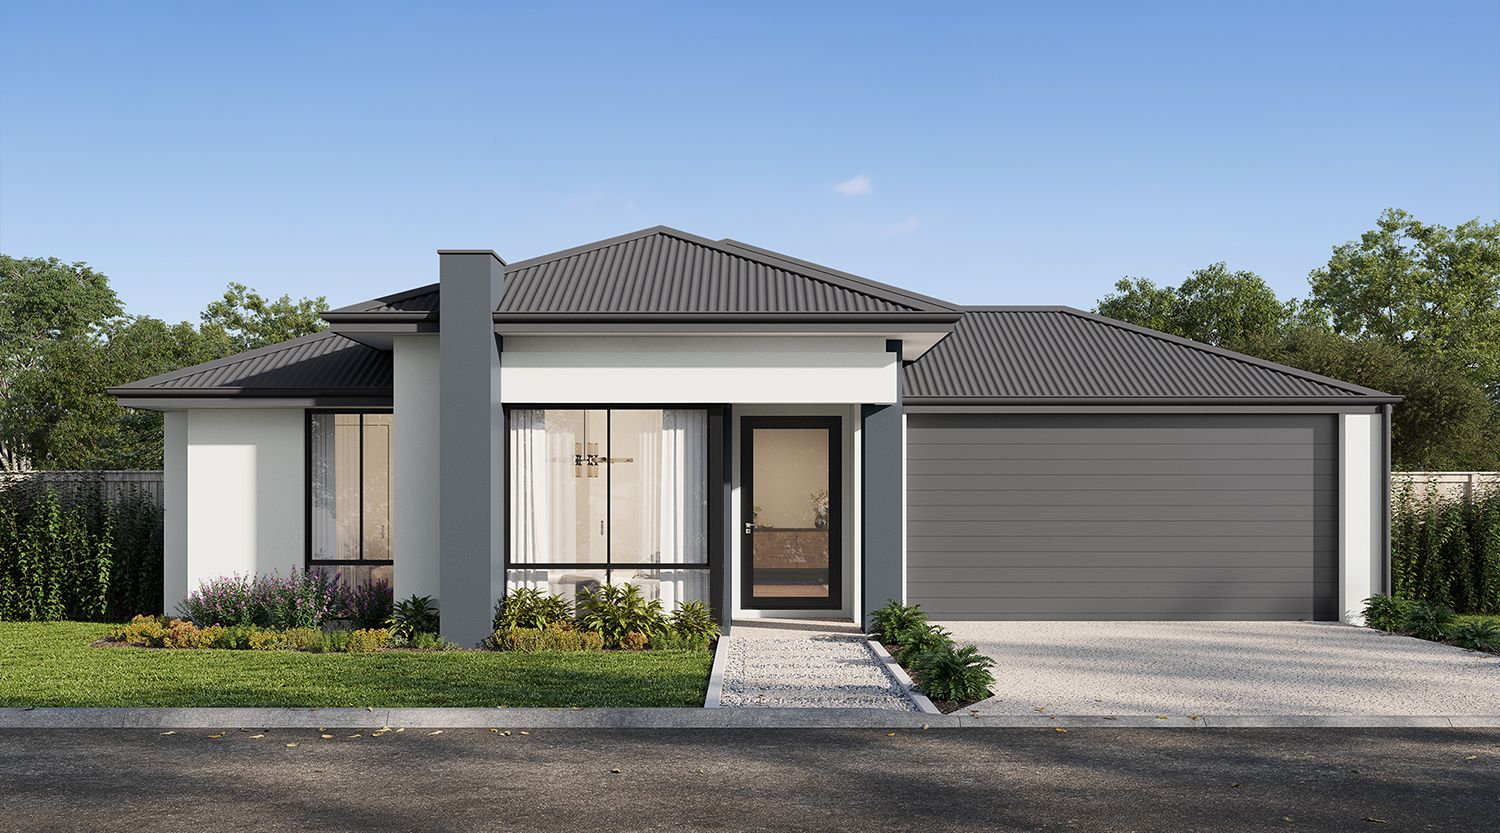 3 bedrooms New House & Land in Lot 2241 Malacca Way MINDARIE WA, 6030